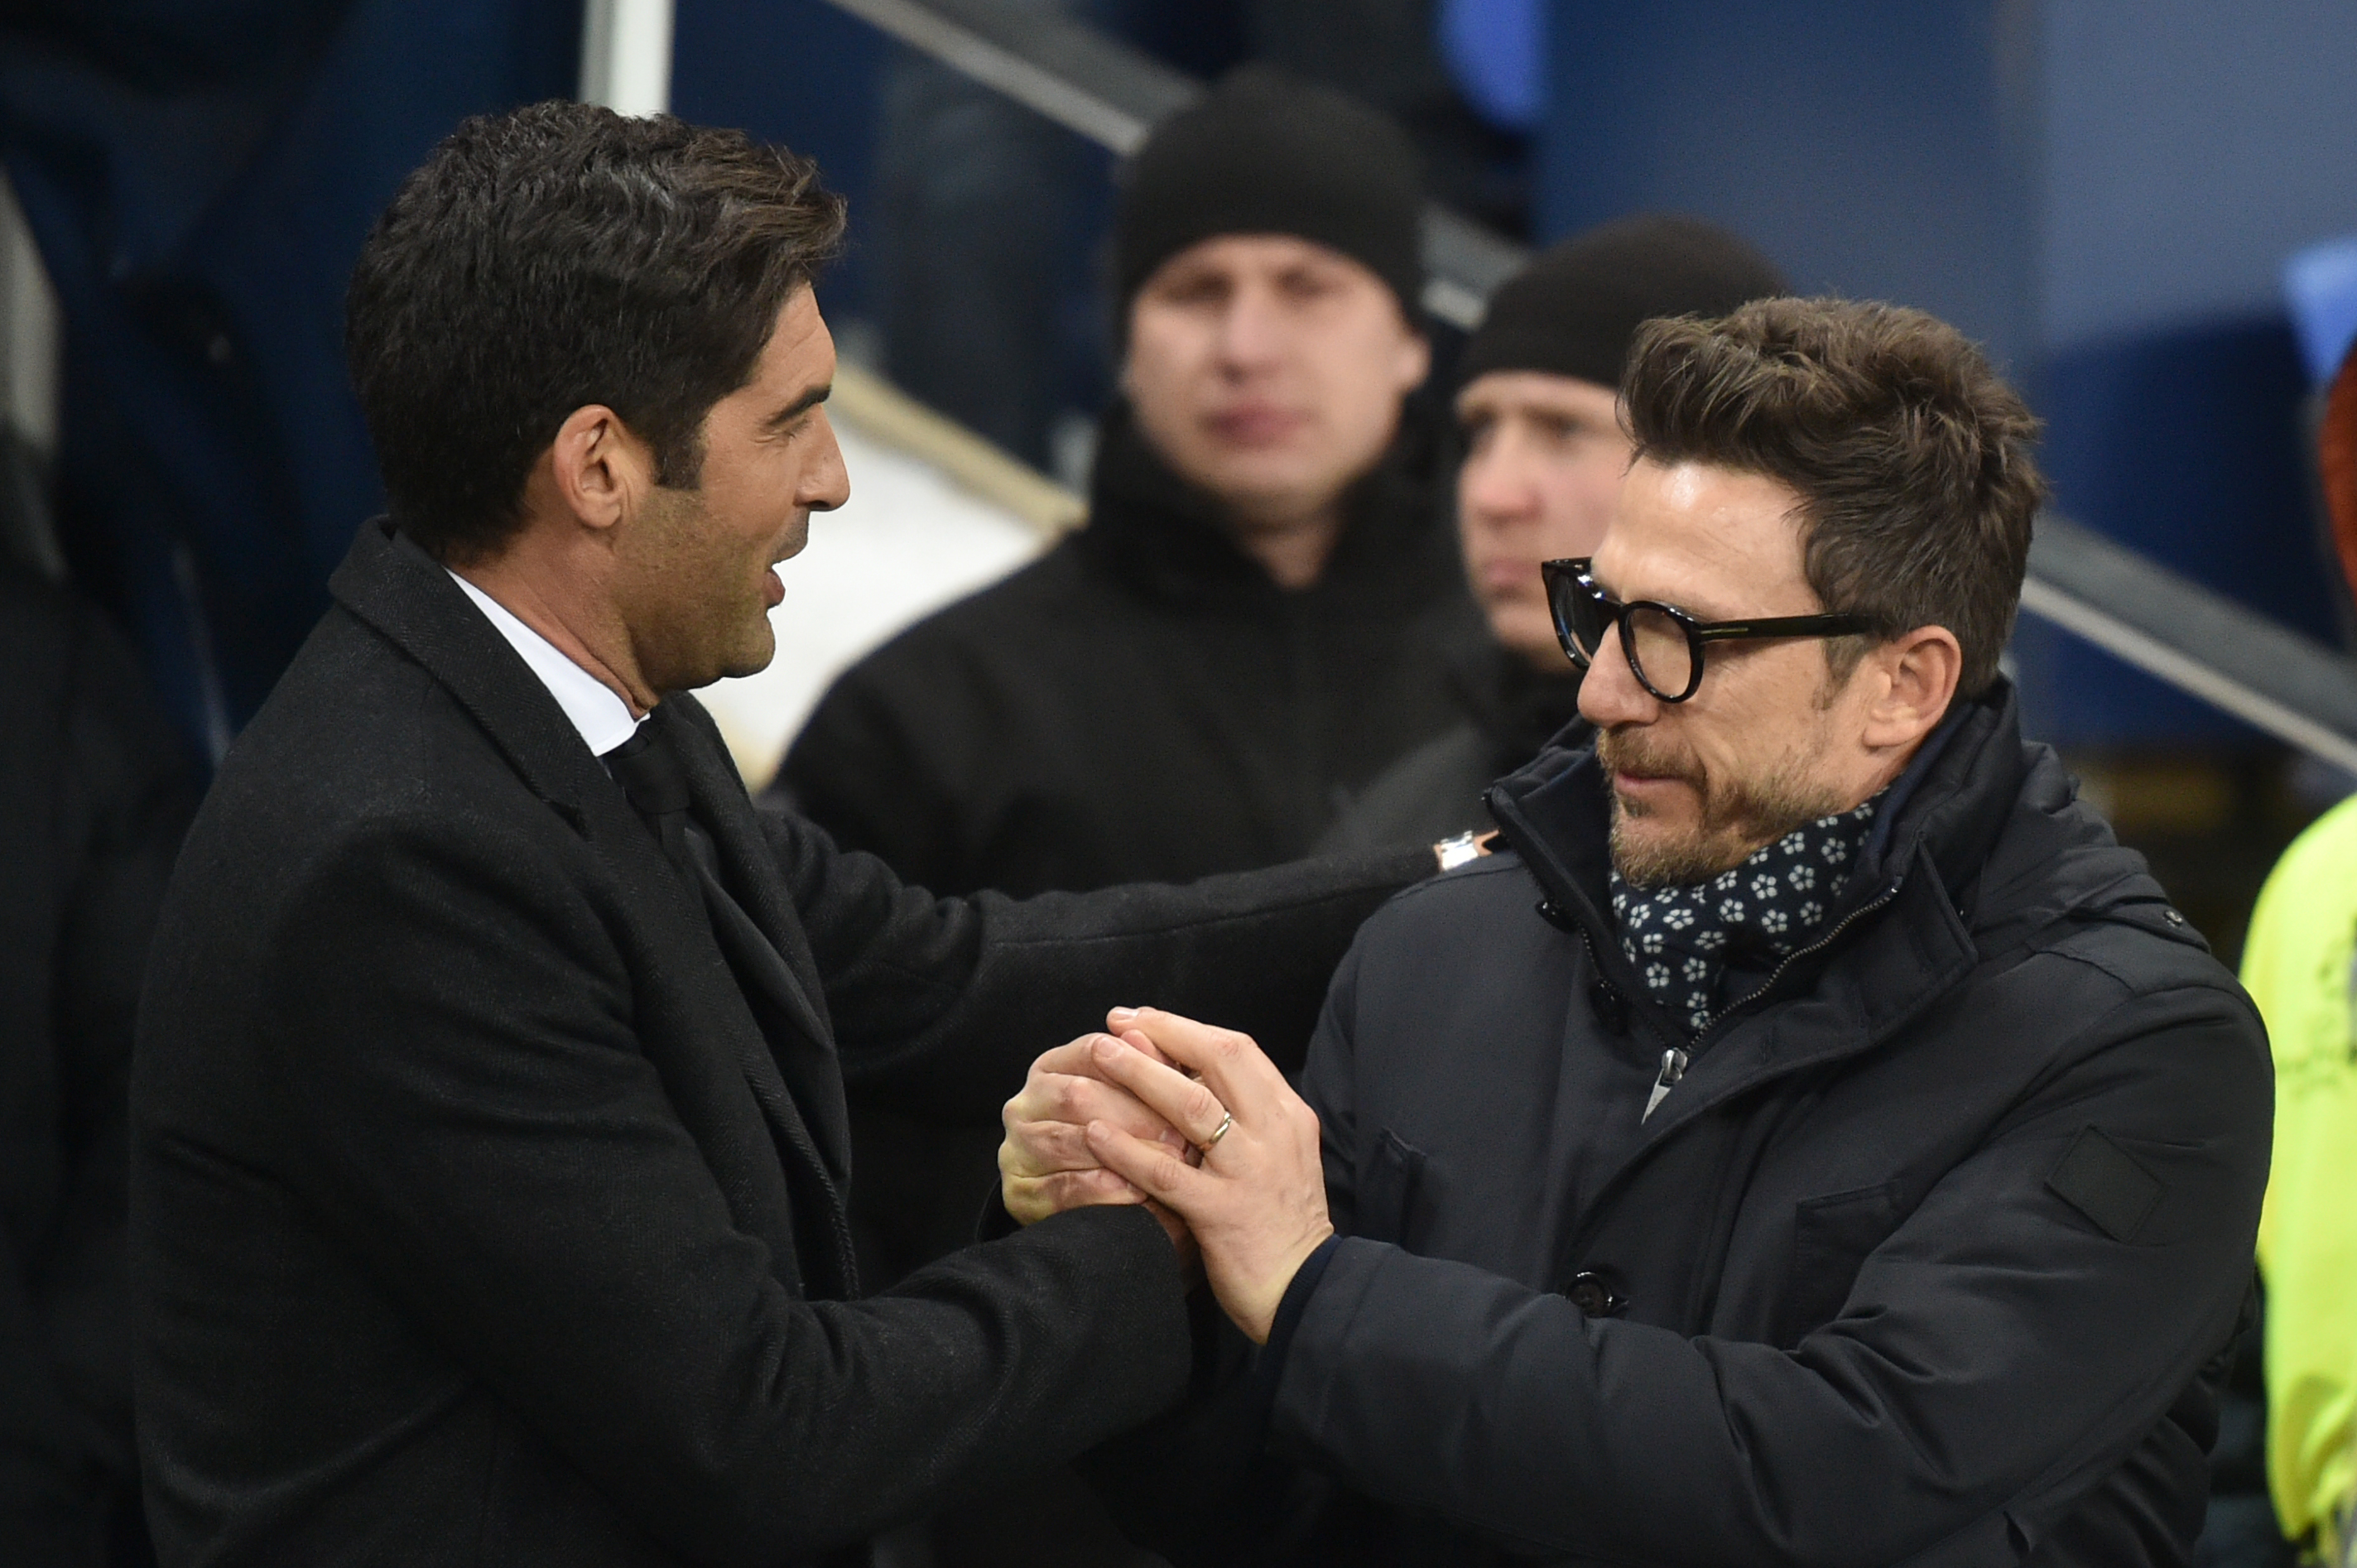 Donetsk's Portuguese head coach Paulo Fonseca (L) and Roma's Italian head coach Eusebio Di Francesco shake handes before the UEFA Champions League round of 16 first leg football match between Shaktar Donetsk and AS Rome at the OSK Metalist Stadion in Kharkiv on February 21, 2018. / AFP PHOTO / Genya SAVILOV        (Photo credit should read GENYA SAVILOV/AFP/Getty Images)